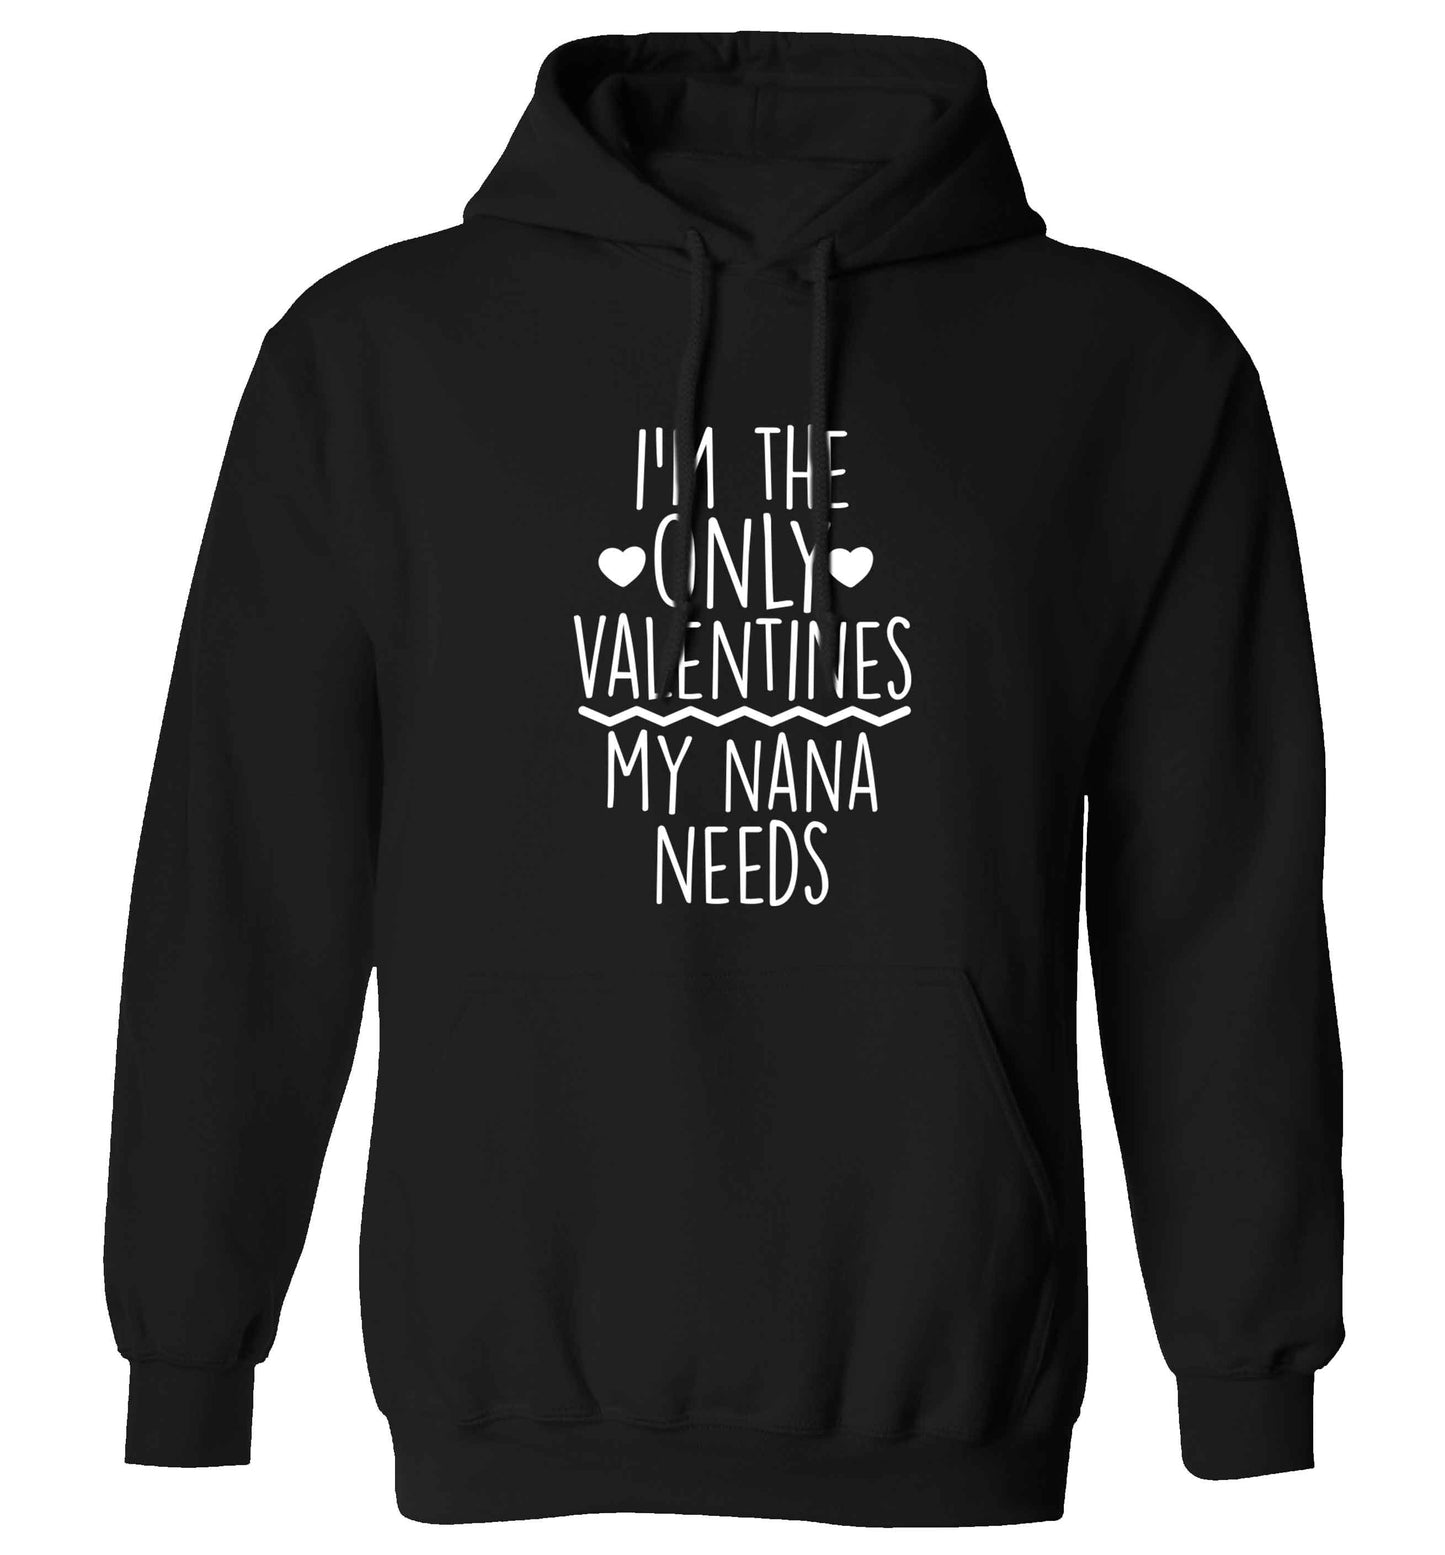 I'm the only valentines my nana needs adults unisex black hoodie 2XL